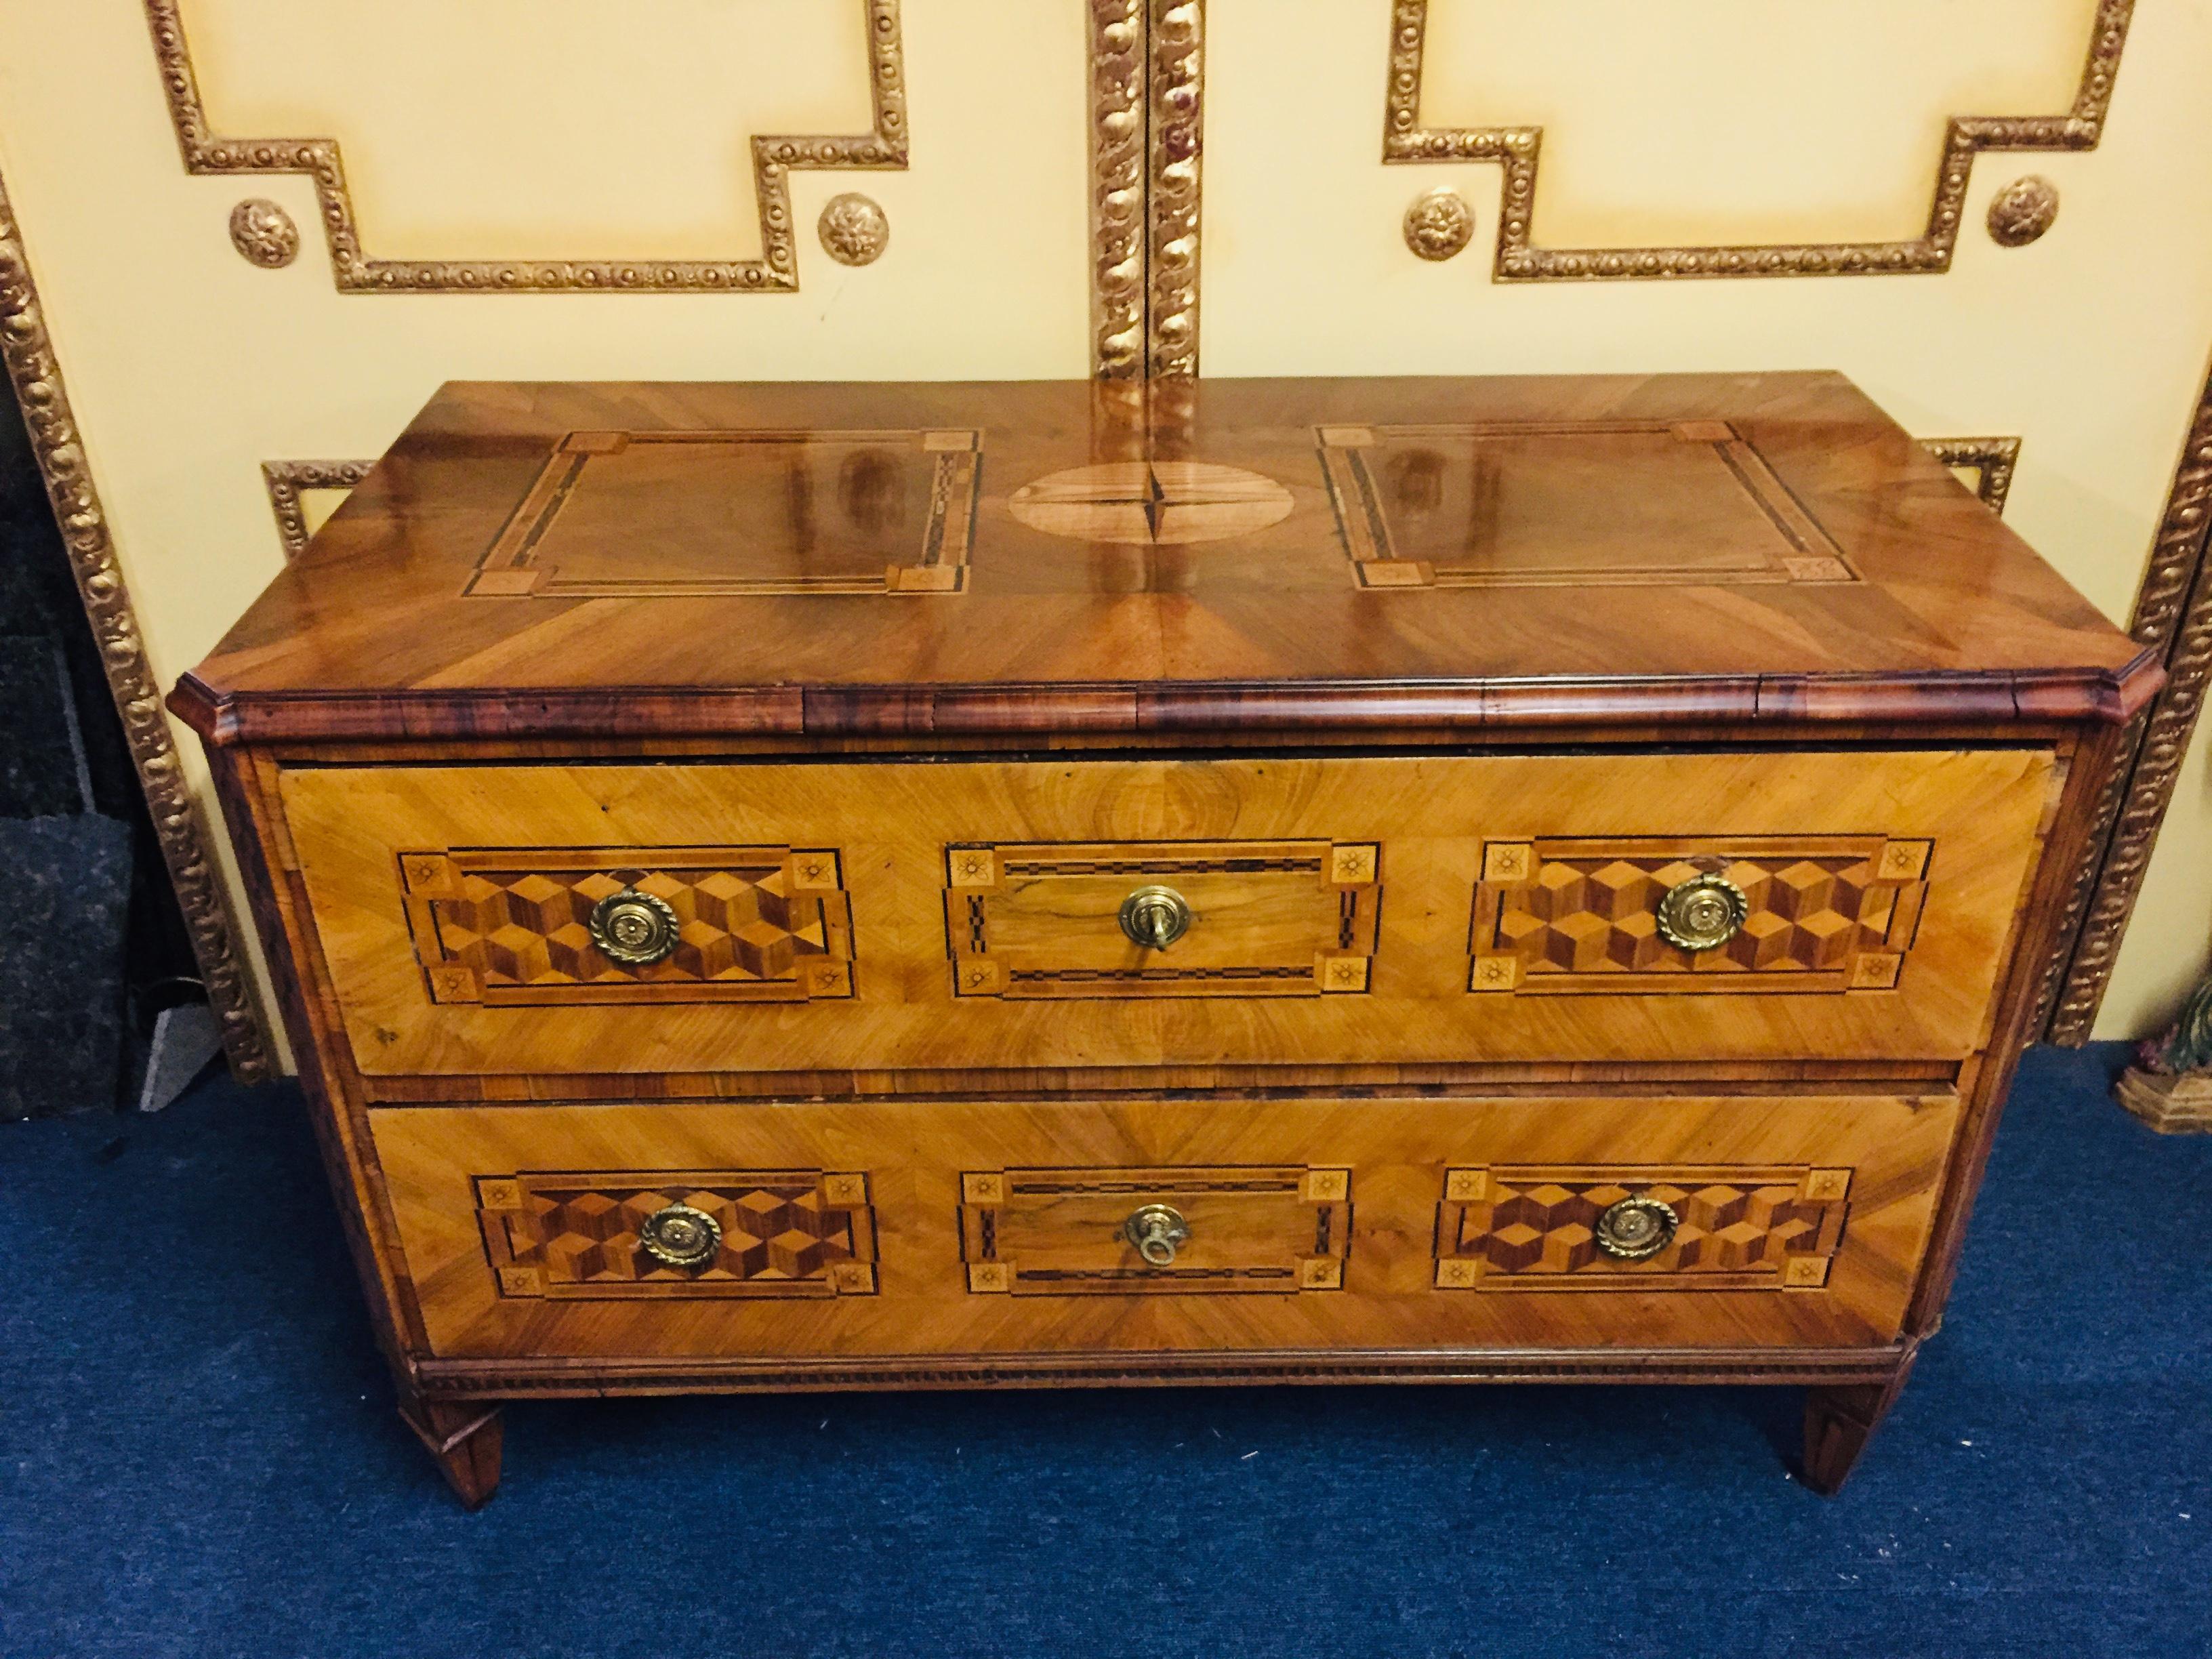 Stunning Louis XVI commode, South German, 1780, walnut veneer and walnut, plum and yew marquetry with geometric shapes on top, sides and front. 
Original brass fittings.
The commode is in a good condition.

 